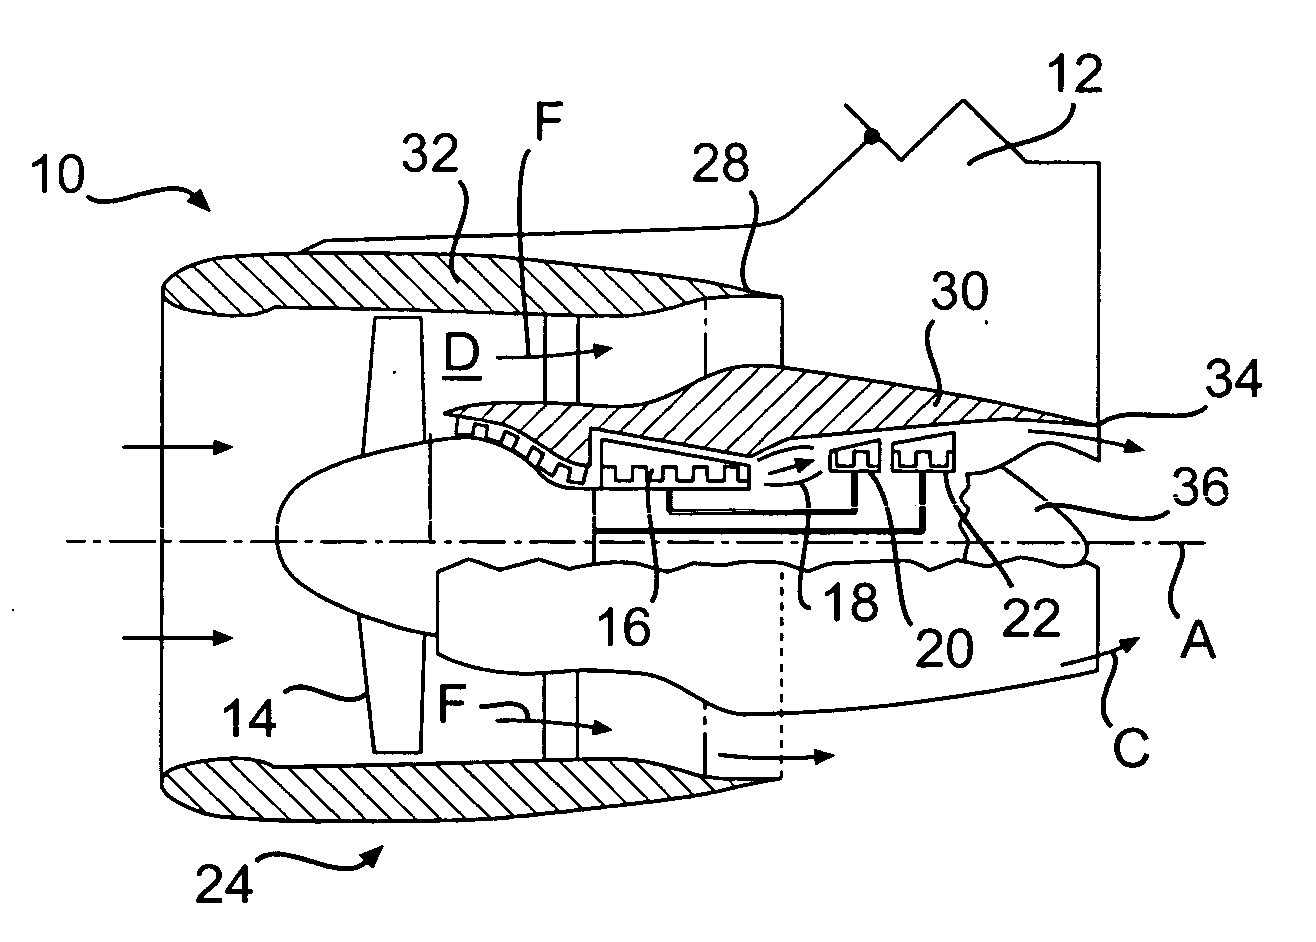 Thrust vectorable fan variable area nozzle for a gas turbine engine fan nacelle